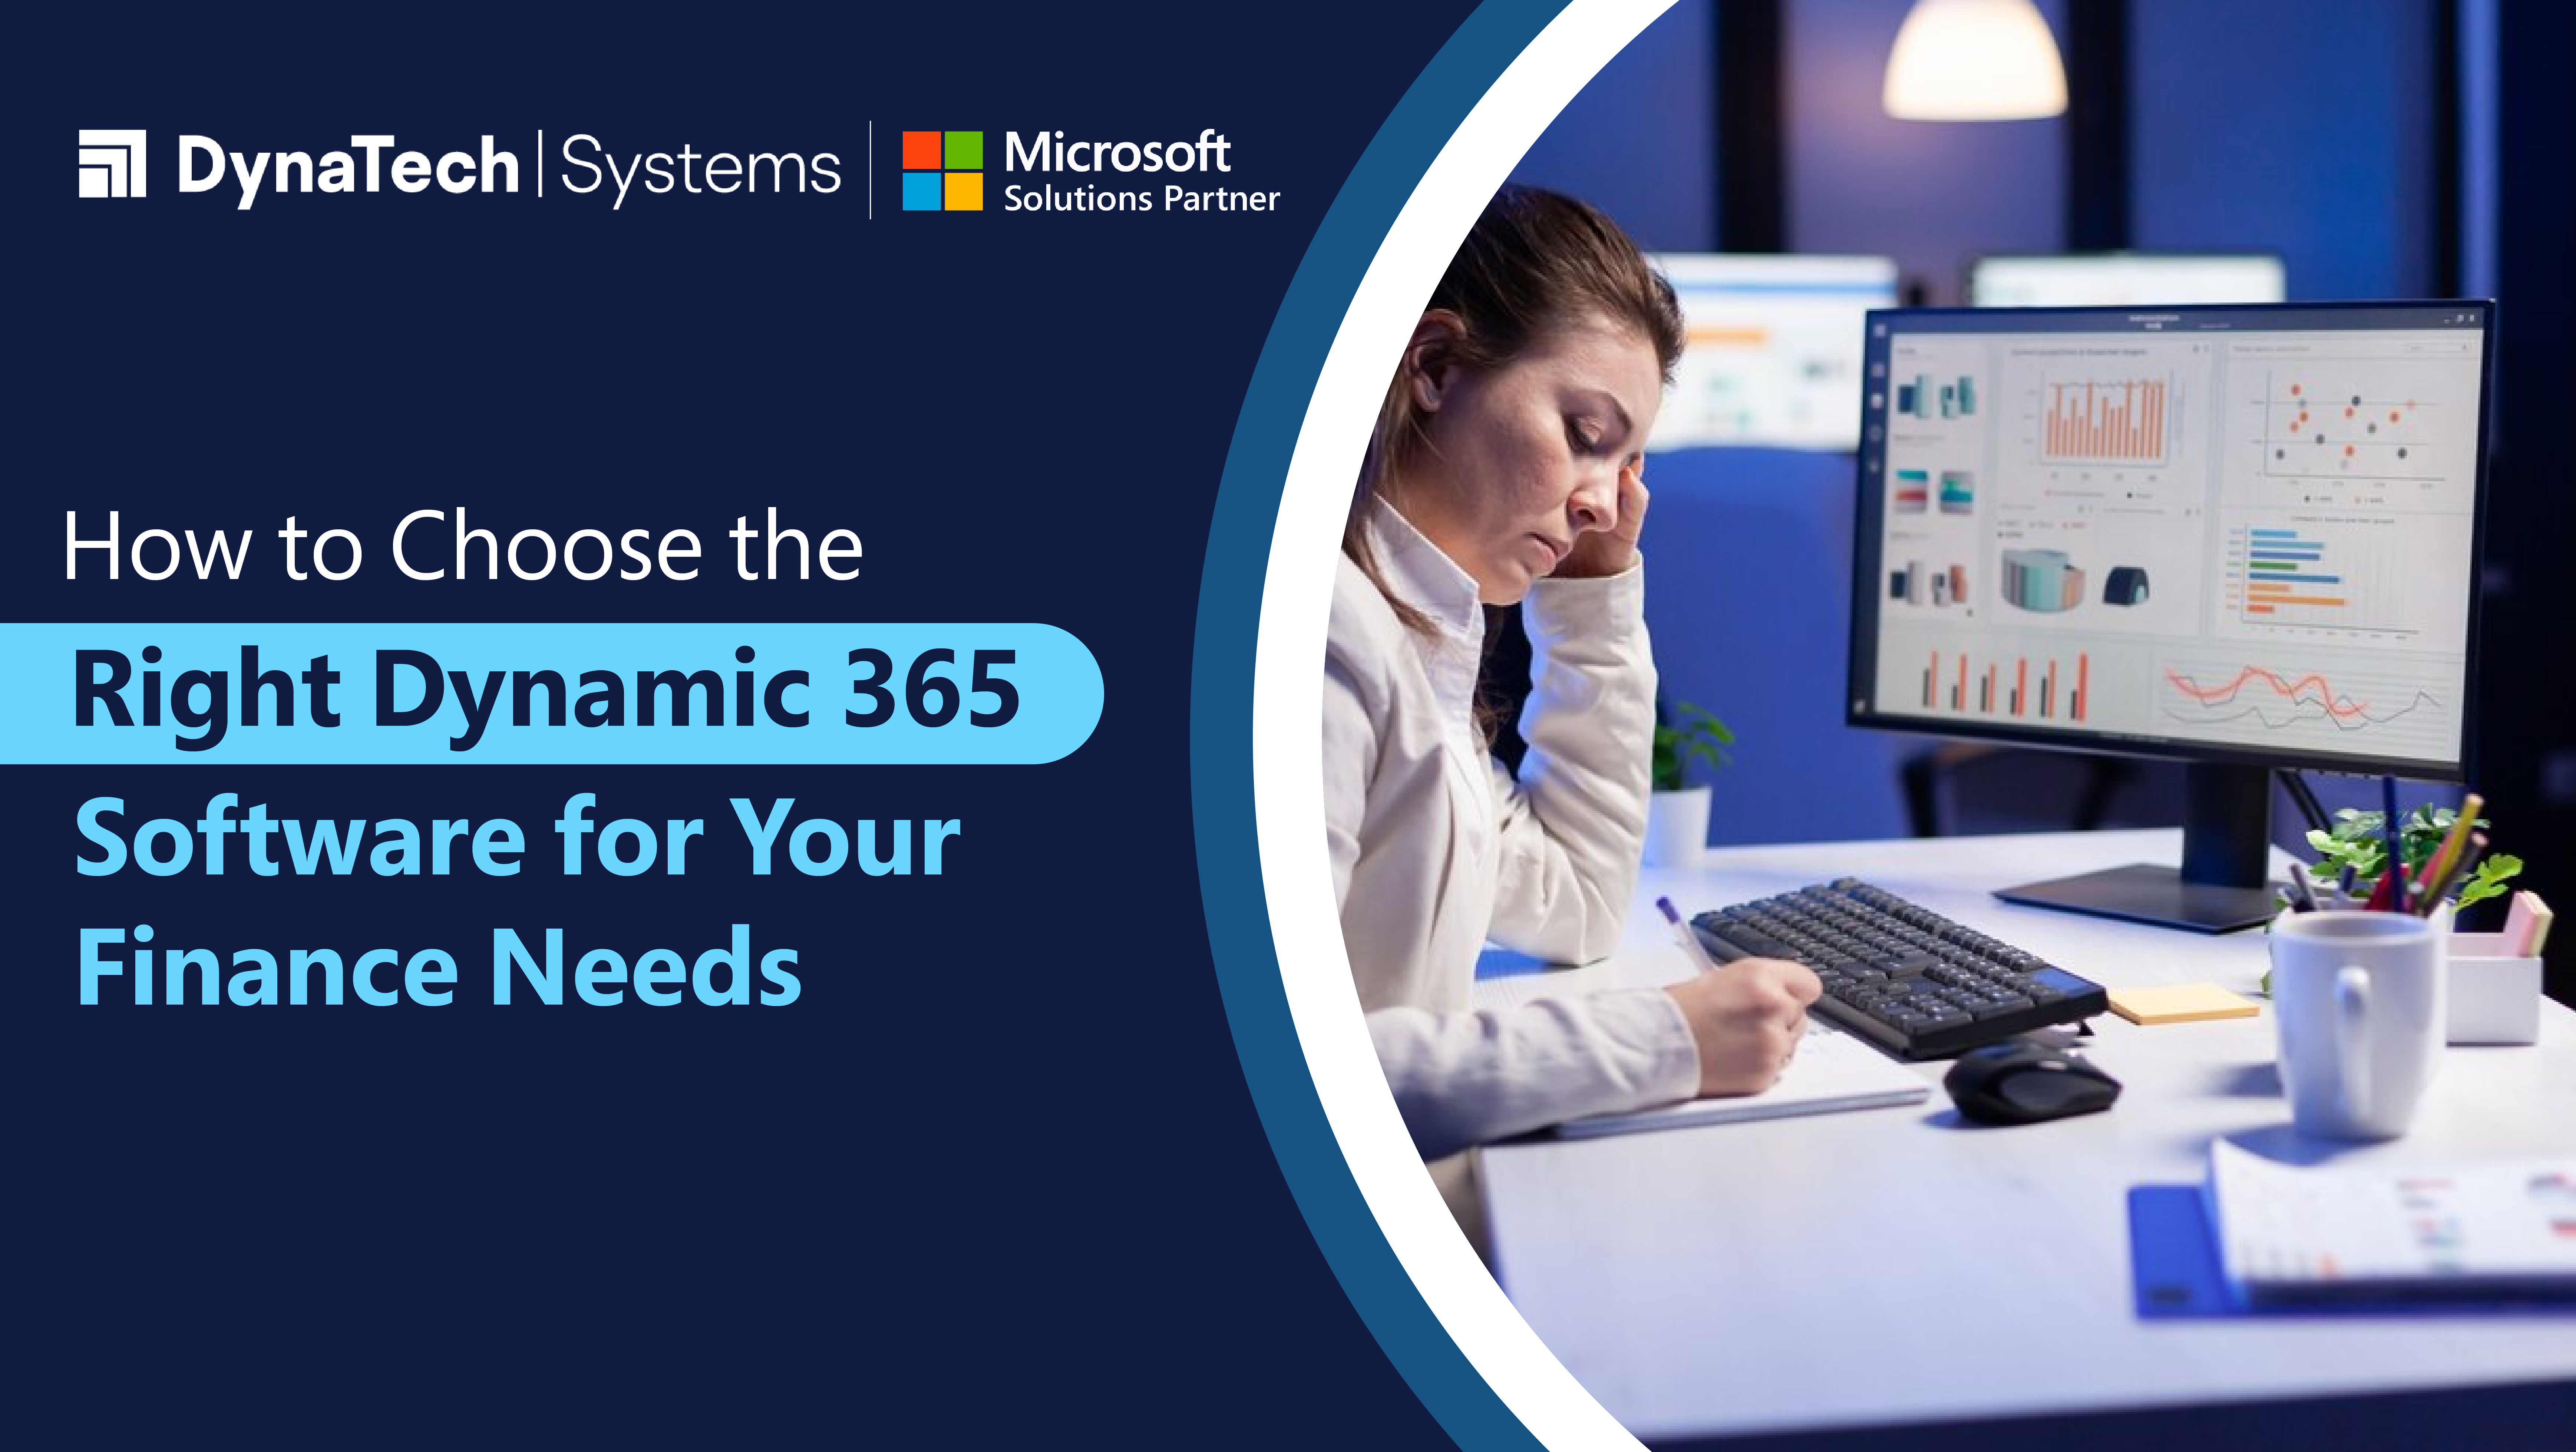 How to Choose the Right Dynamic 365 Software for Your Finance Needs